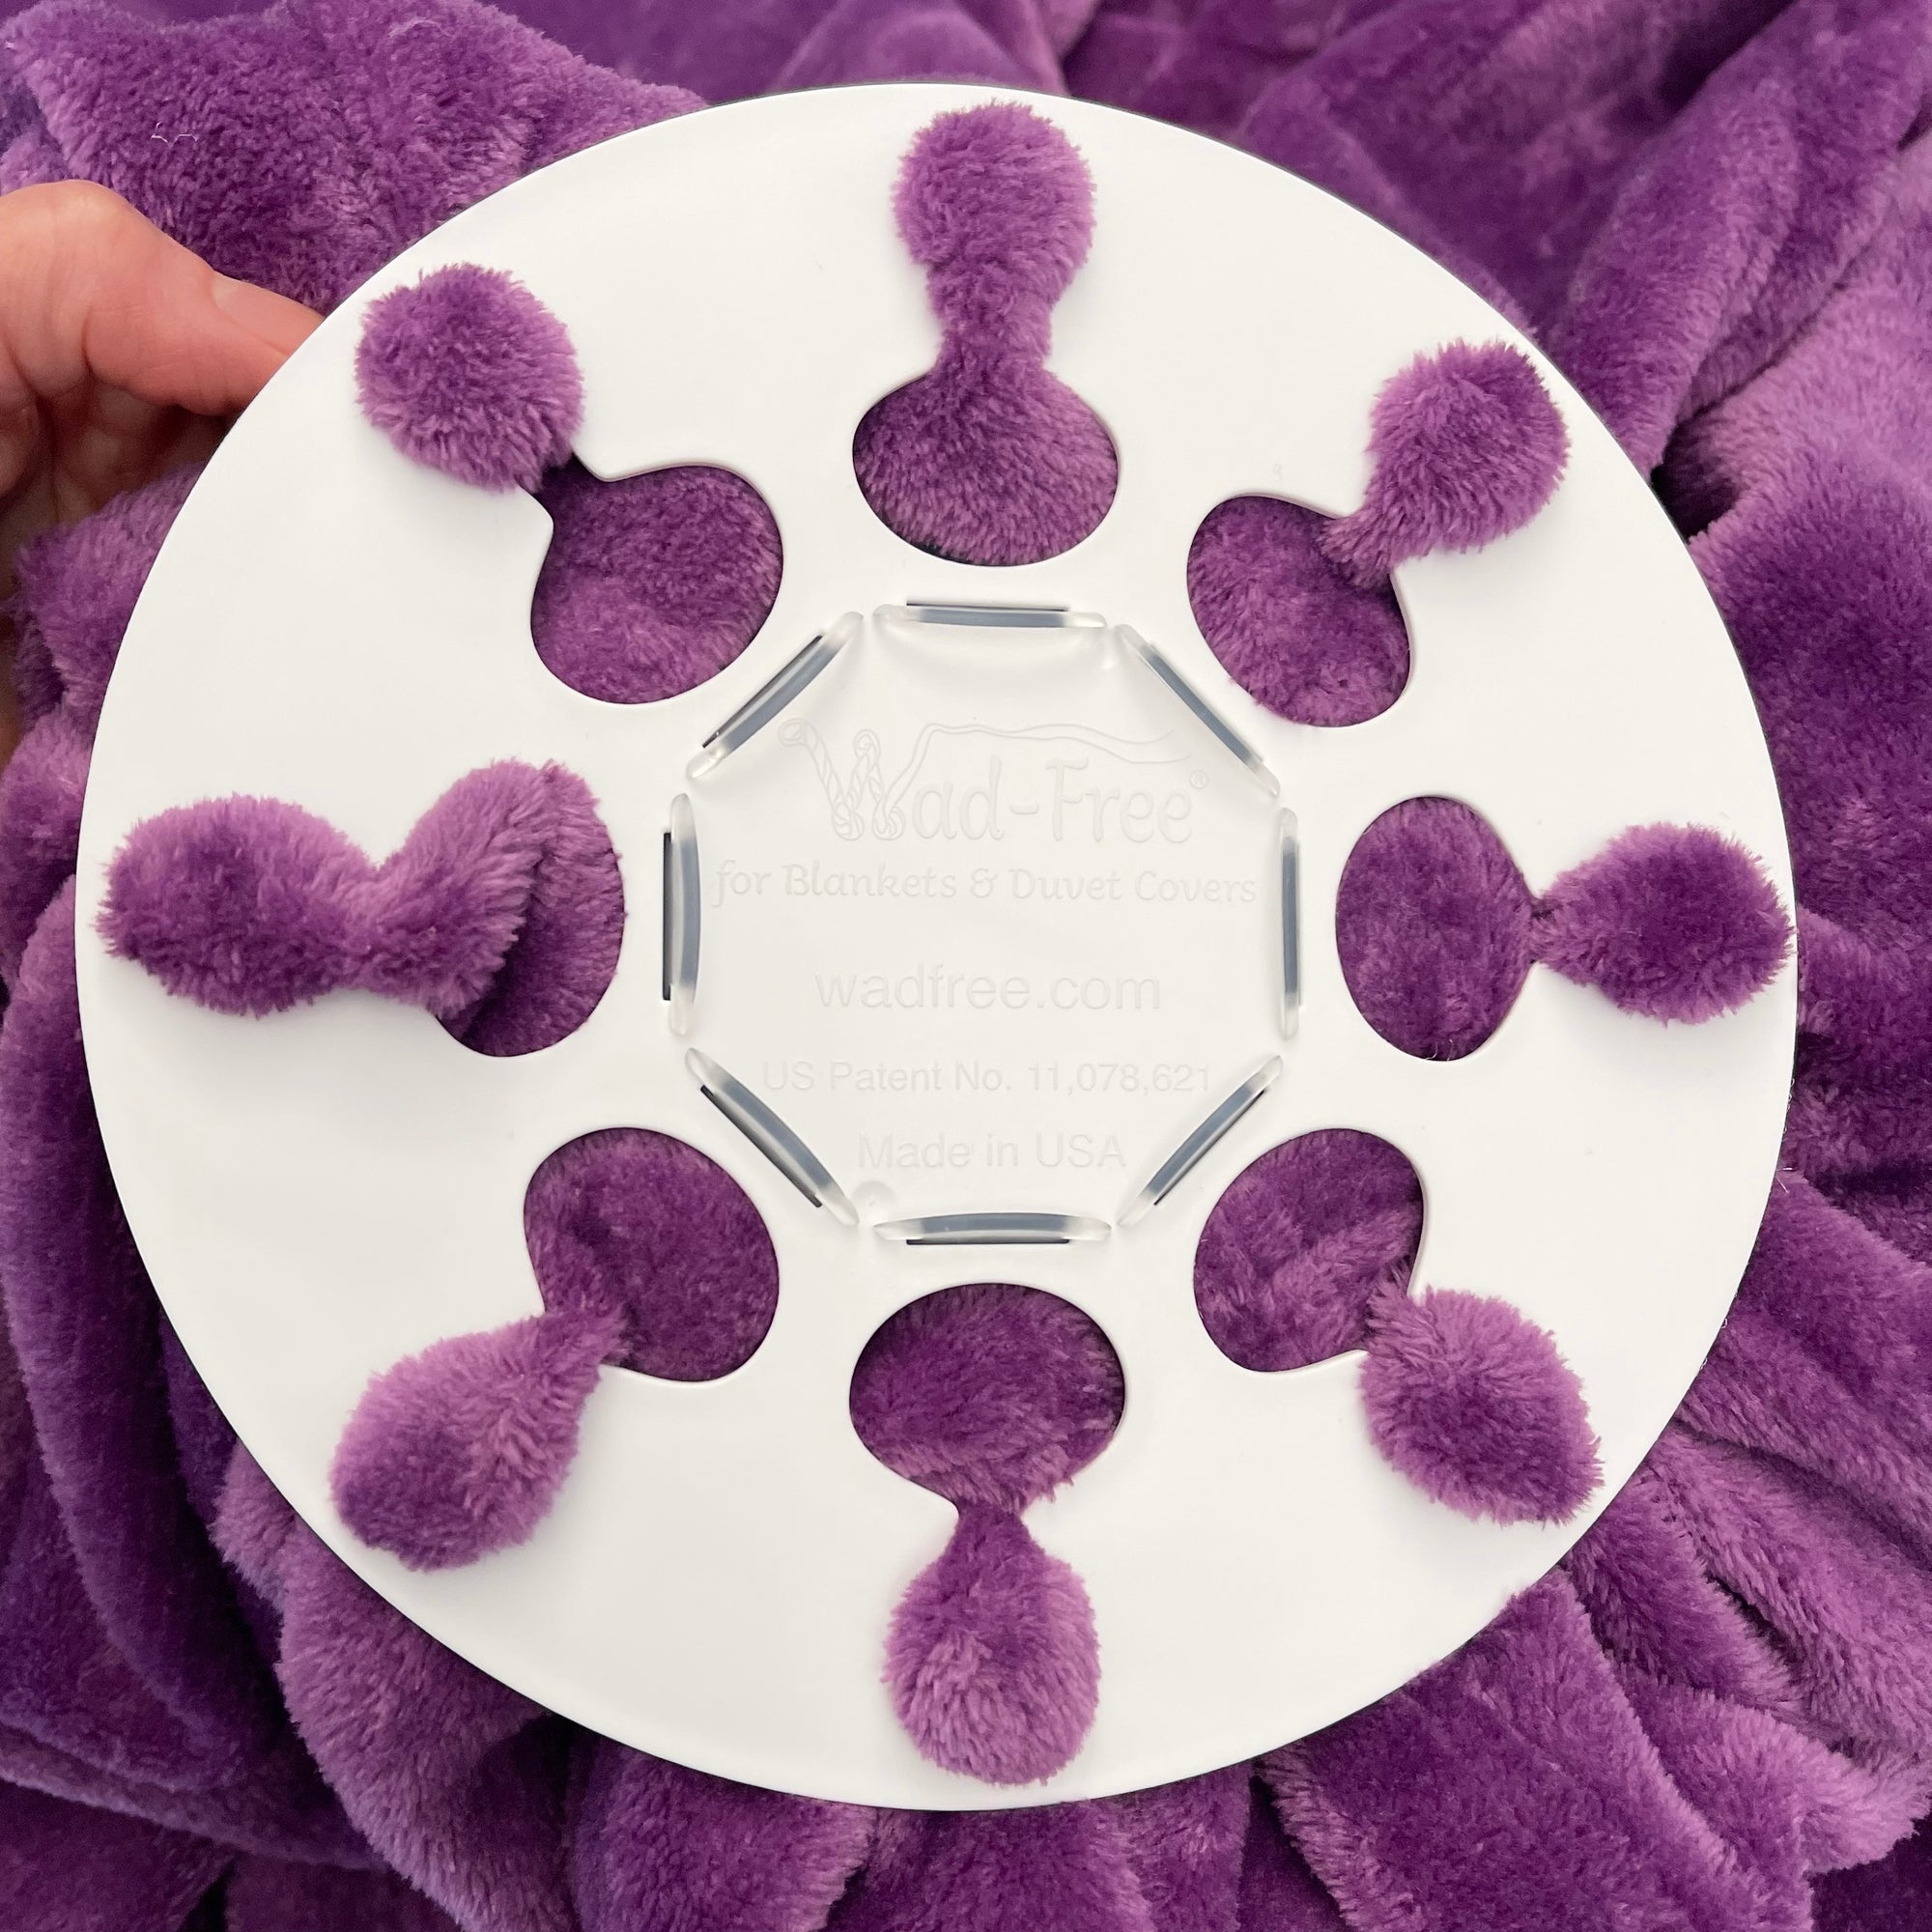 Wad-Free for Blankets &amp; Duvet Covers White round Wad-Free attached to plush purple blanket